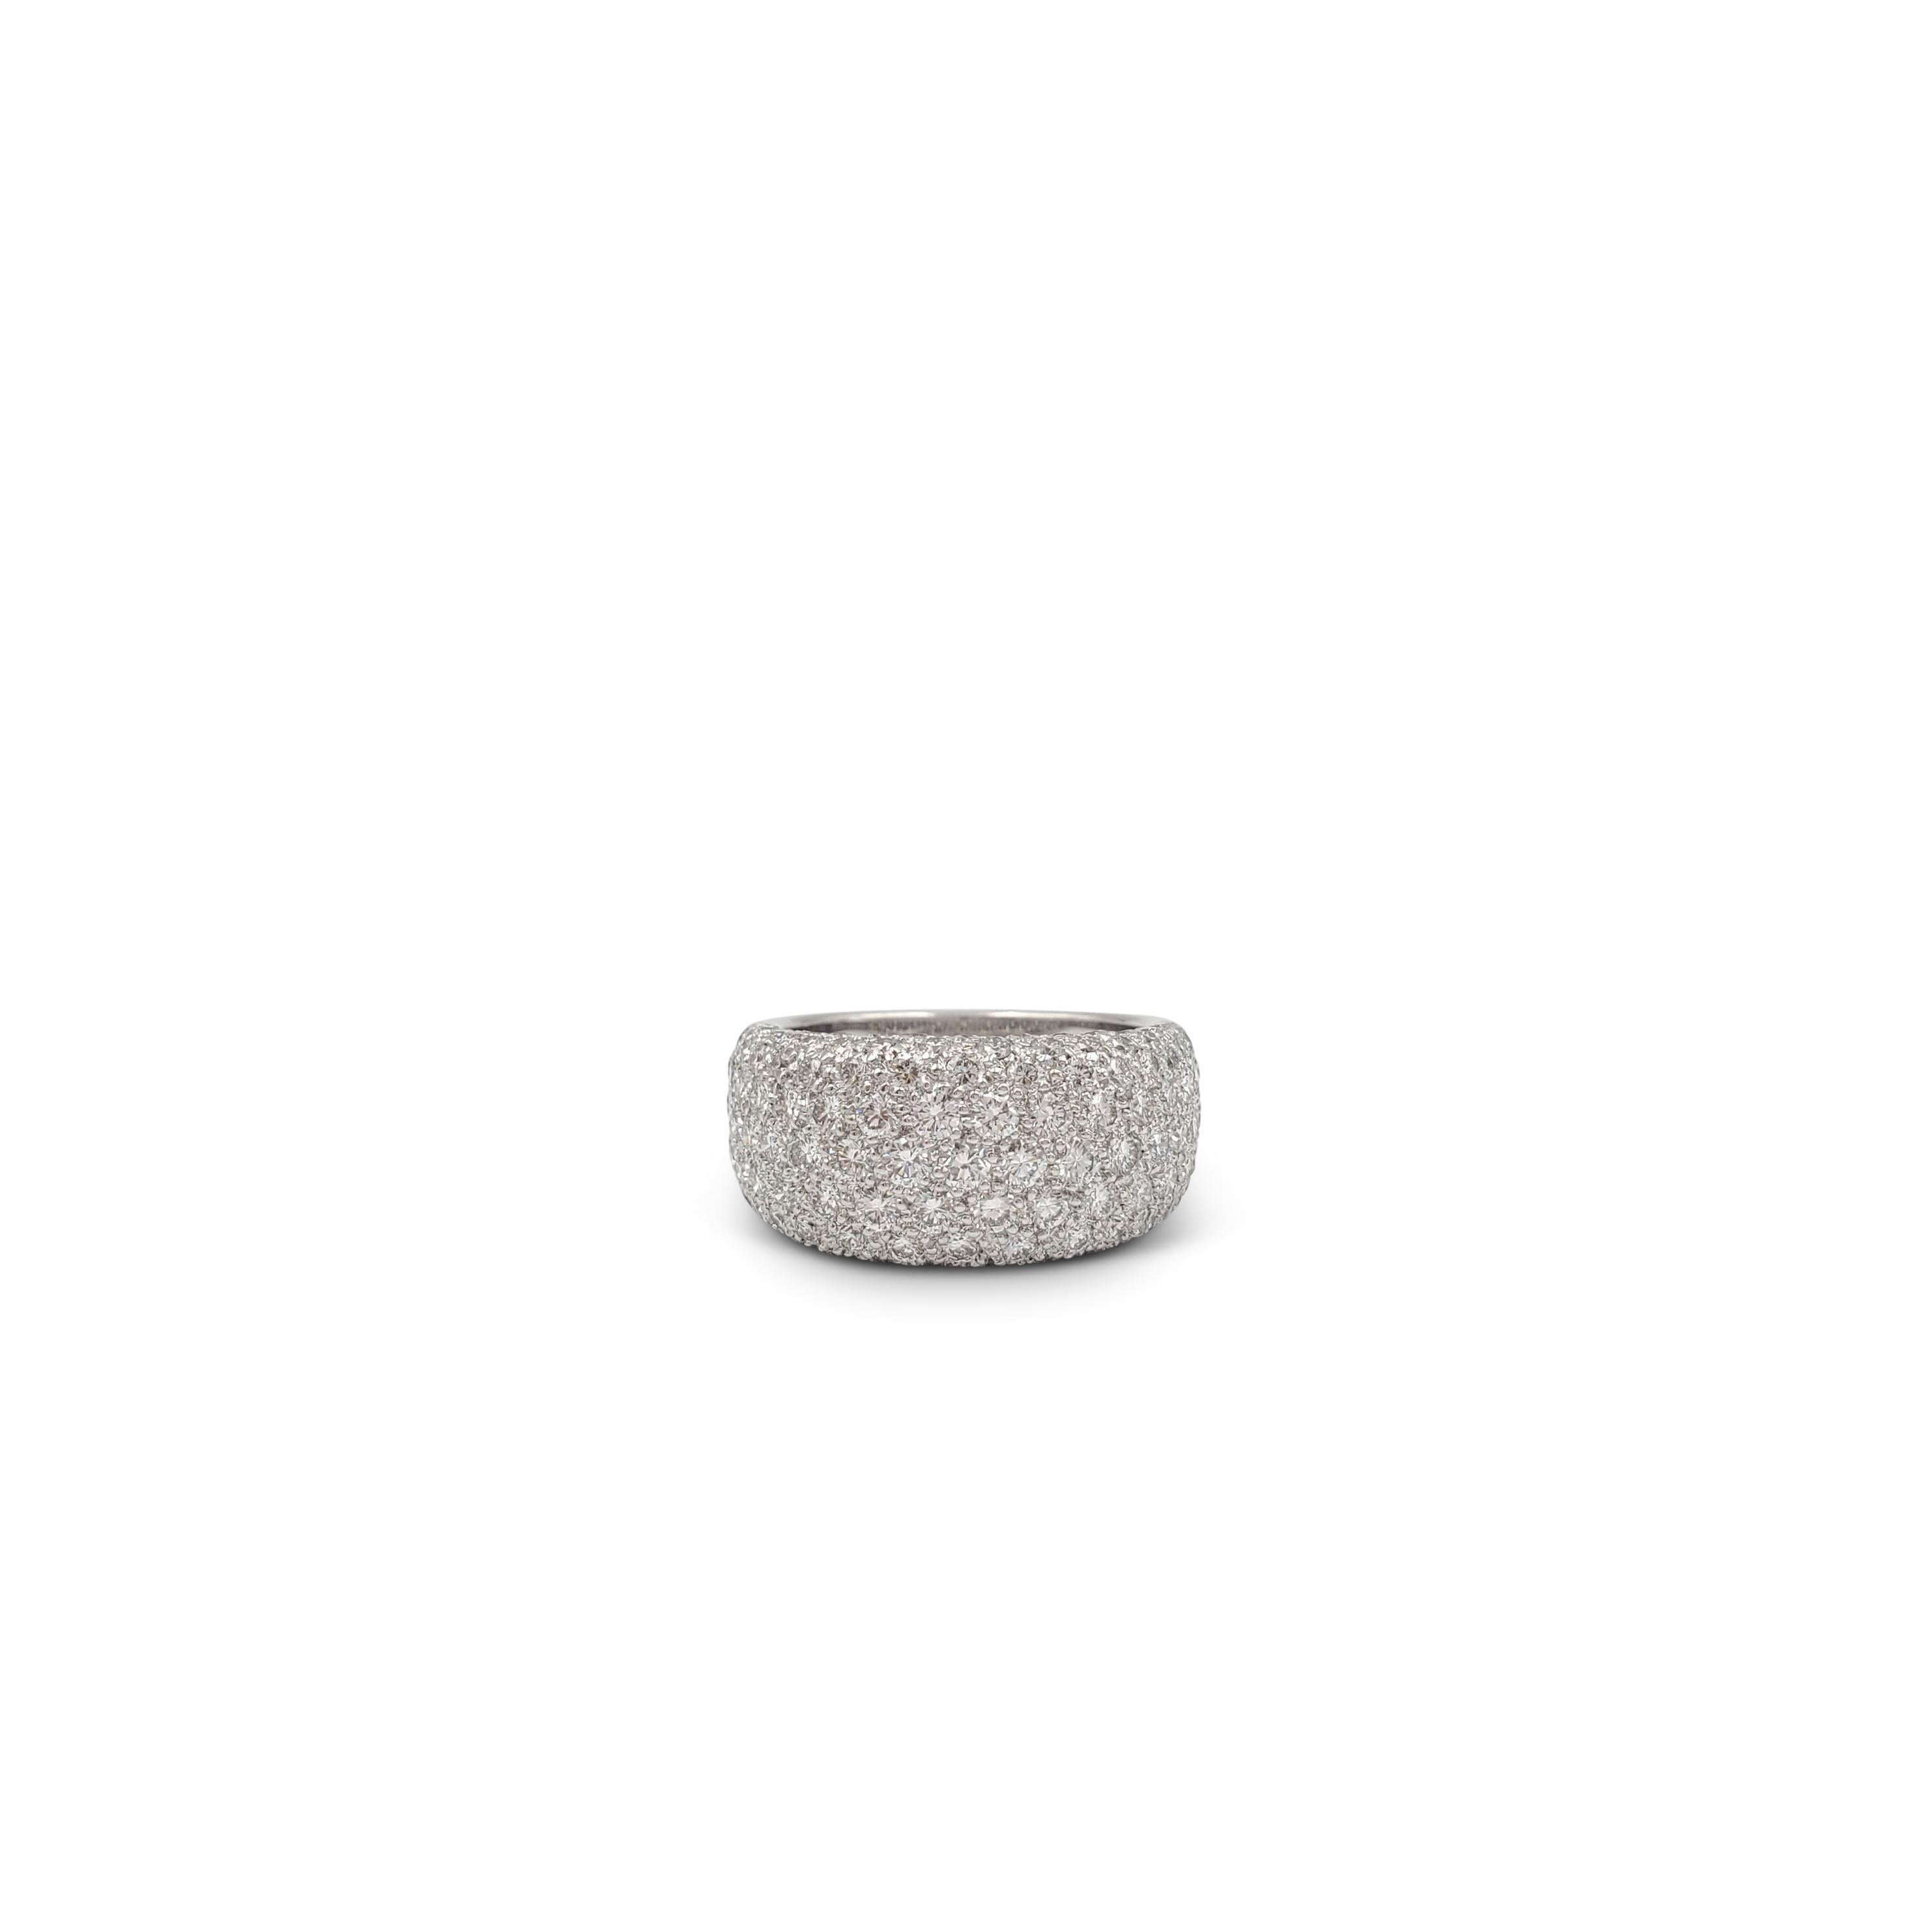 Authentic Cartier 'Nouvelle Vague' dome-shaped ring crafted in 18 karat white gold is pavé set with an estimated 2.40 carats of round brilliant cut diamonds (E-F color, VS clarity). Signed Cartier, 750, 53, with serial number. Ring size 53 (US 6